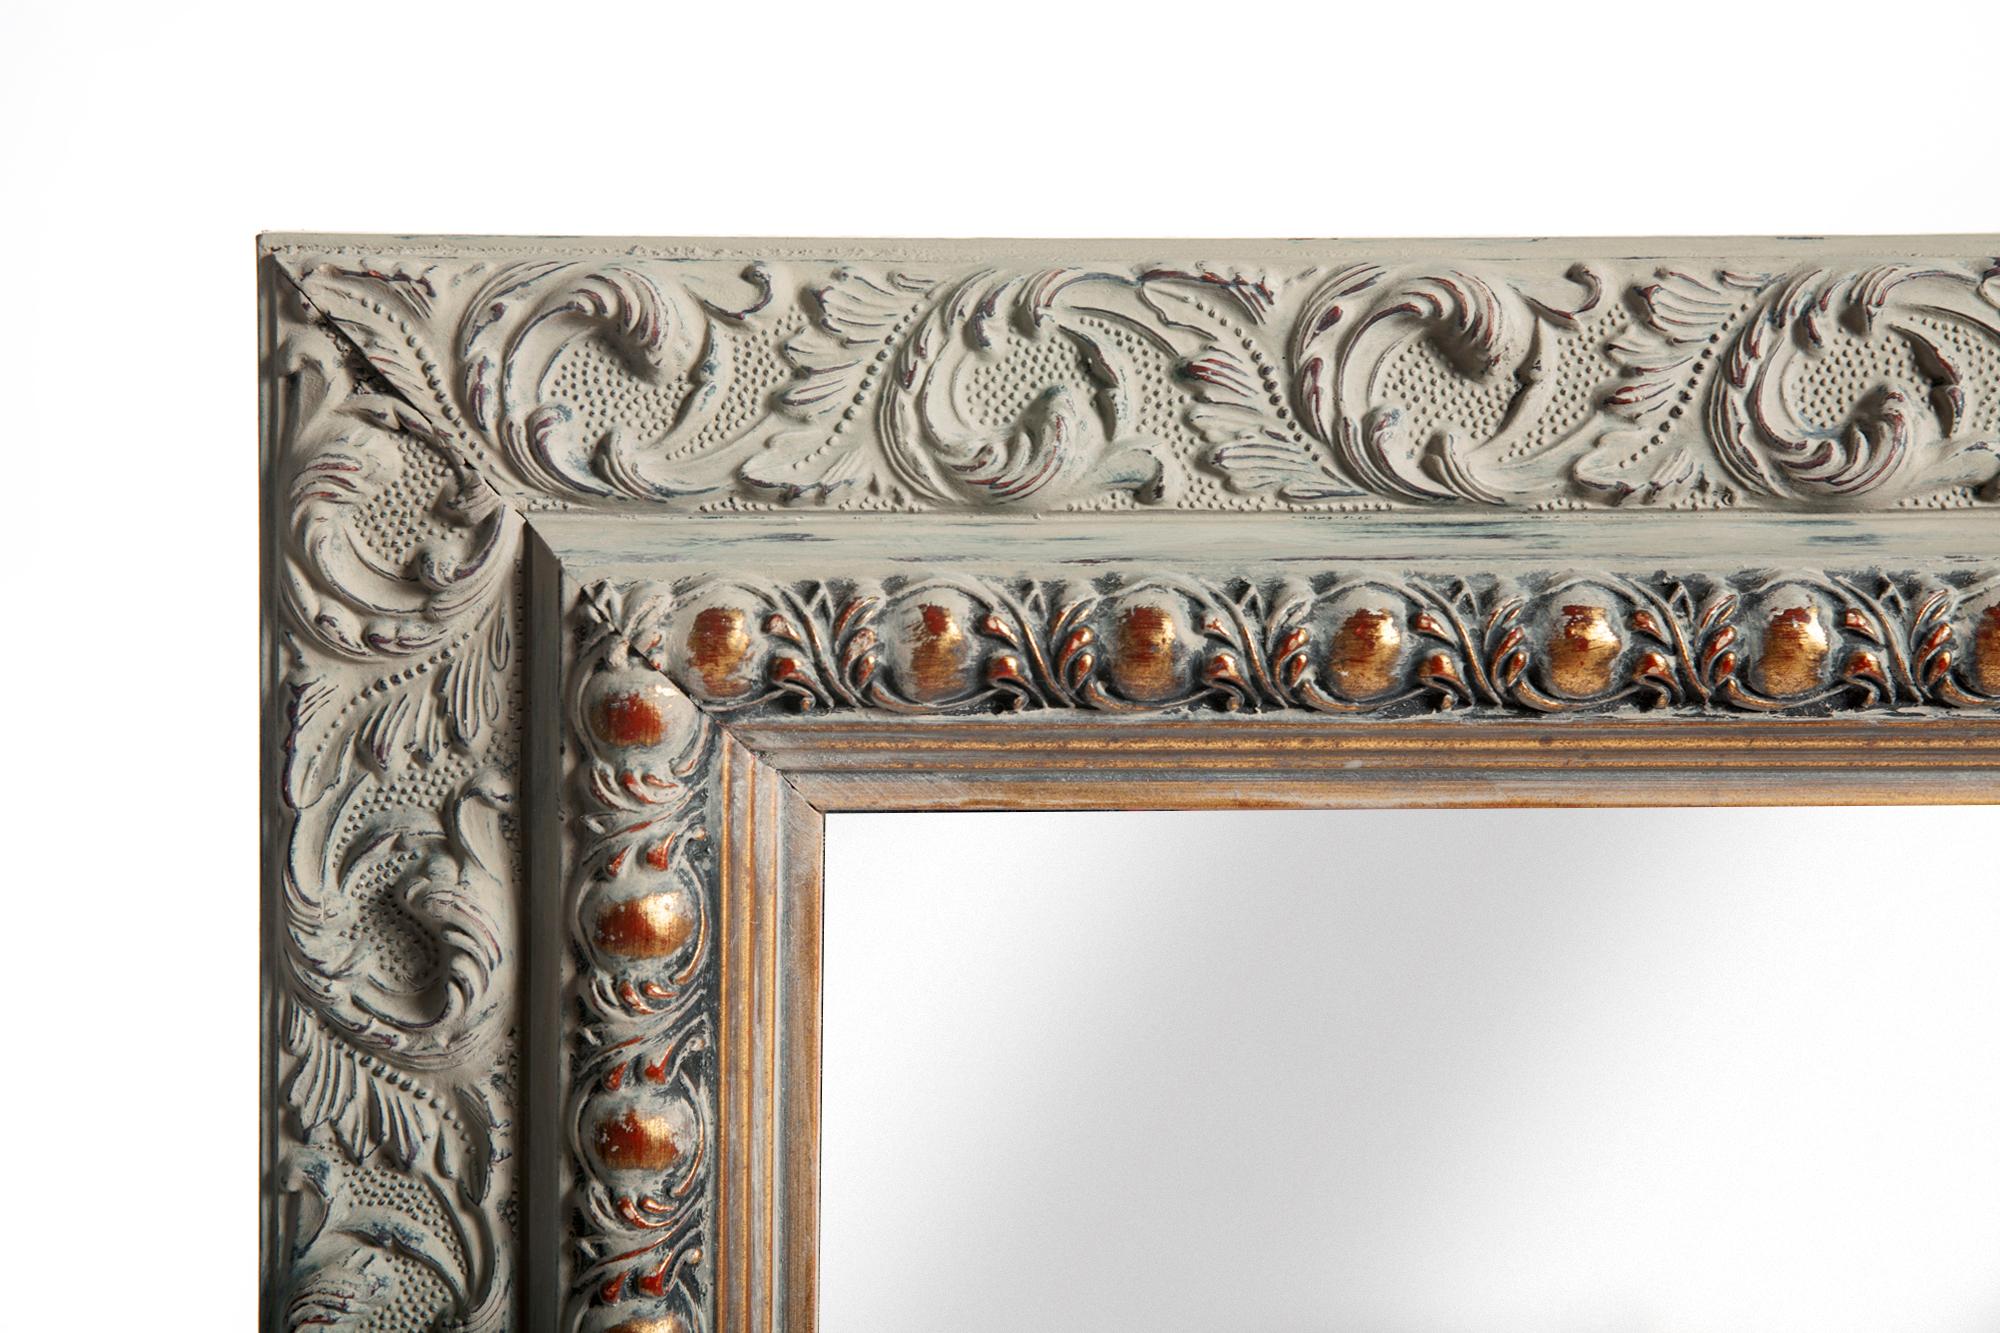 Vintage Victorian style frame, hand painted in neutral tones over slate red & gold. New mirrored glass & backing.
Measures: 1.75